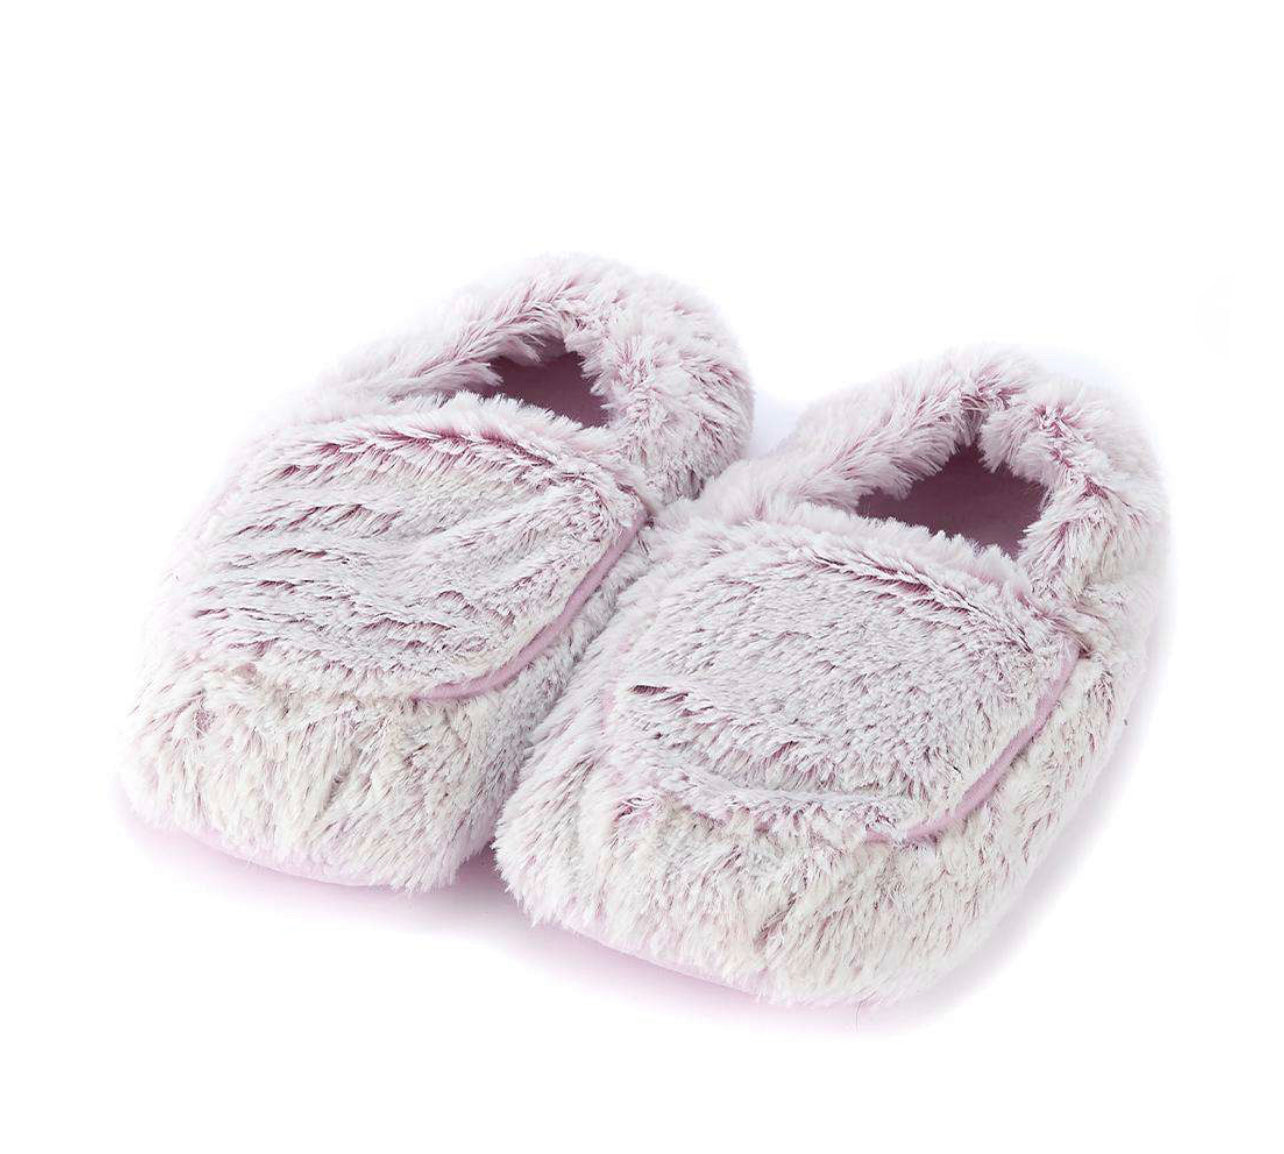 Warmies Plush Body Slippers - Available in 4 colors